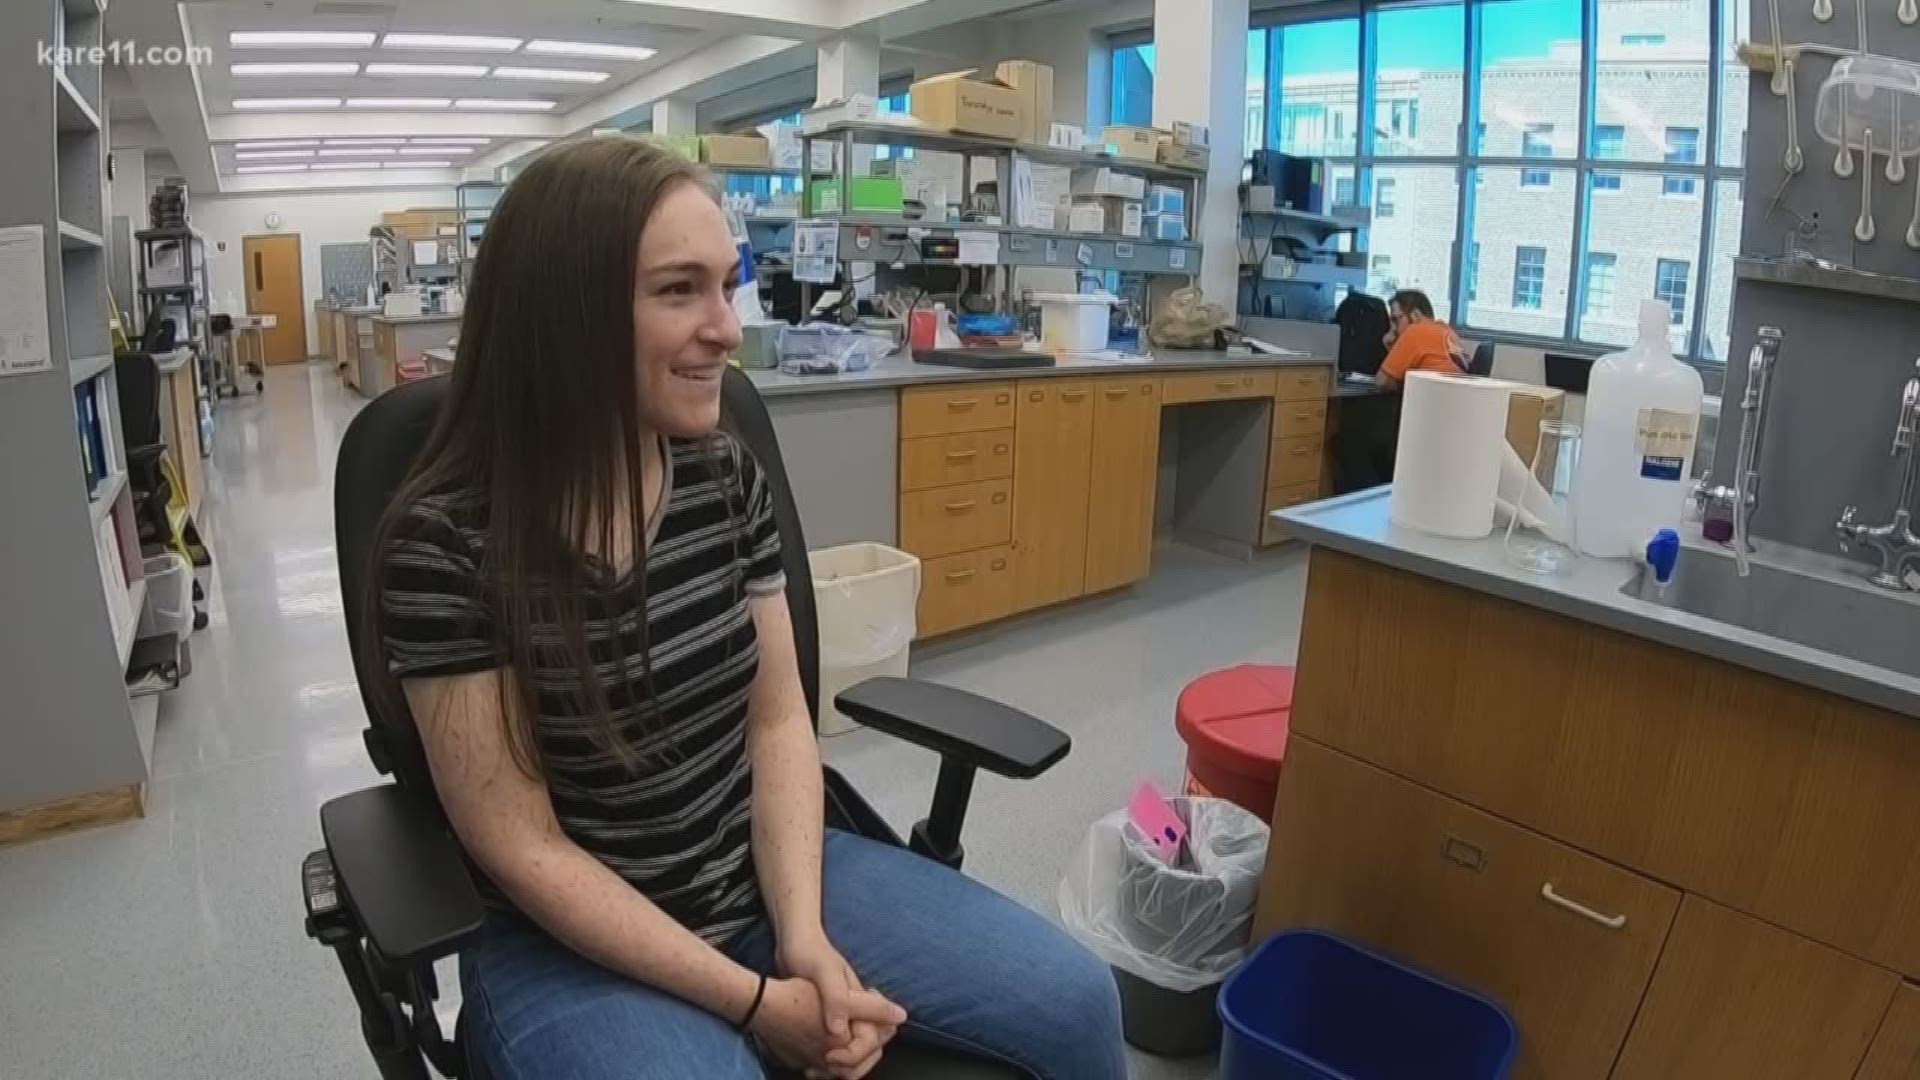 The University of Minnesota doesn't normally award summer research internships to a high school junior, but Aimee Milota isn't normal. She's one in a million.